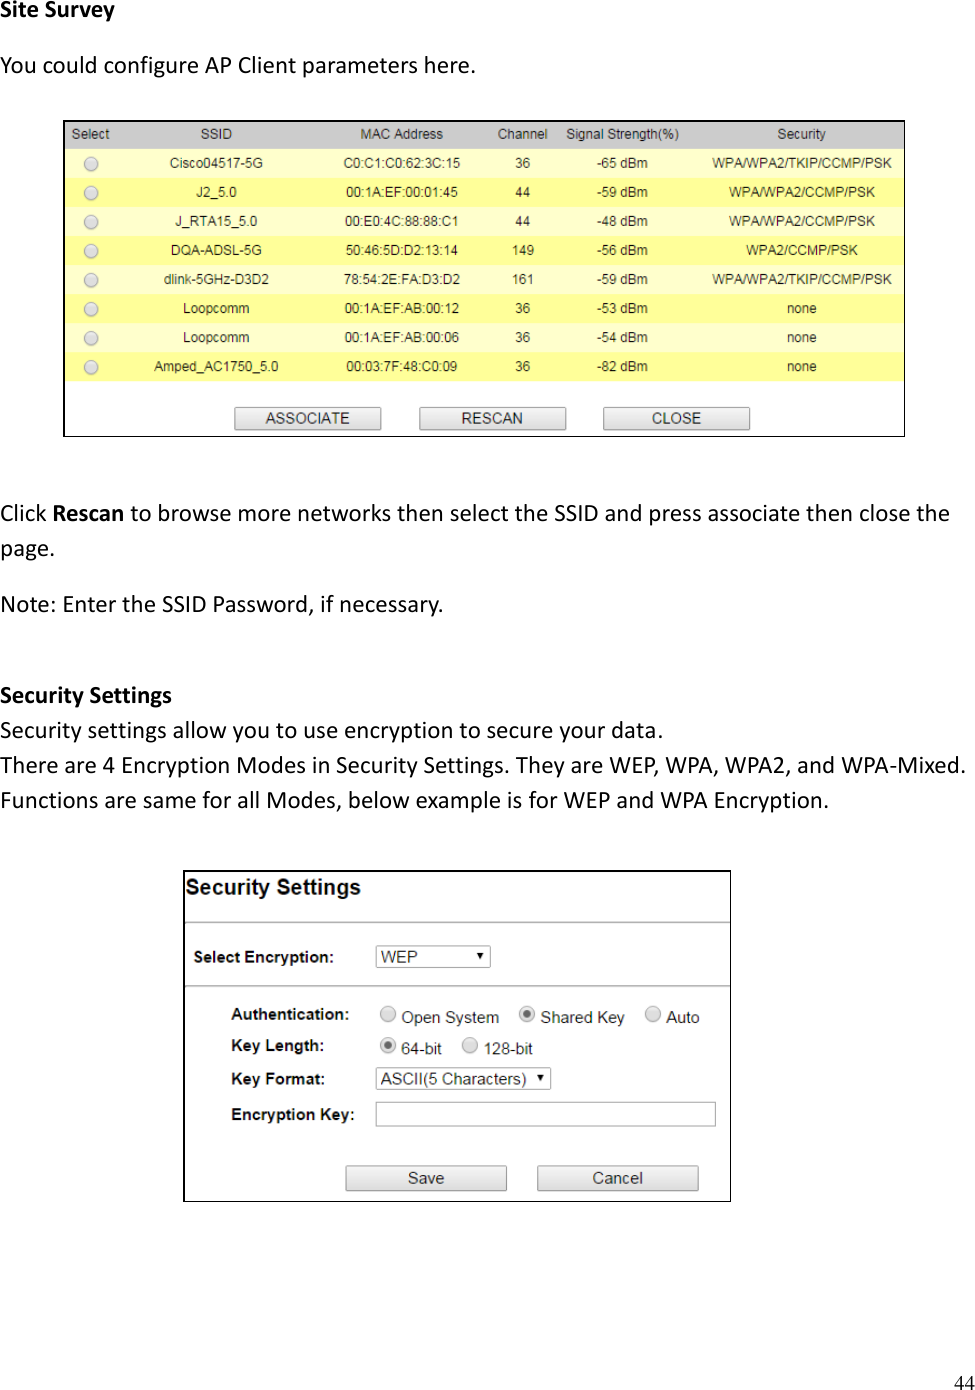 44  Site Survey You could configure AP Client parameters here.        Click Rescan to browse more networks then select the SSID and press associate then close the page.  Note: Enter the SSID Password, if necessary.  Security Settings Security settings allow you to use encryption to secure your data. There are 4 Encryption Modes in Security Settings. They are WEP, WPA, WPA2, and WPA-Mixed. Functions are same for all Modes, below example is for WEP and WPA Encryption.          